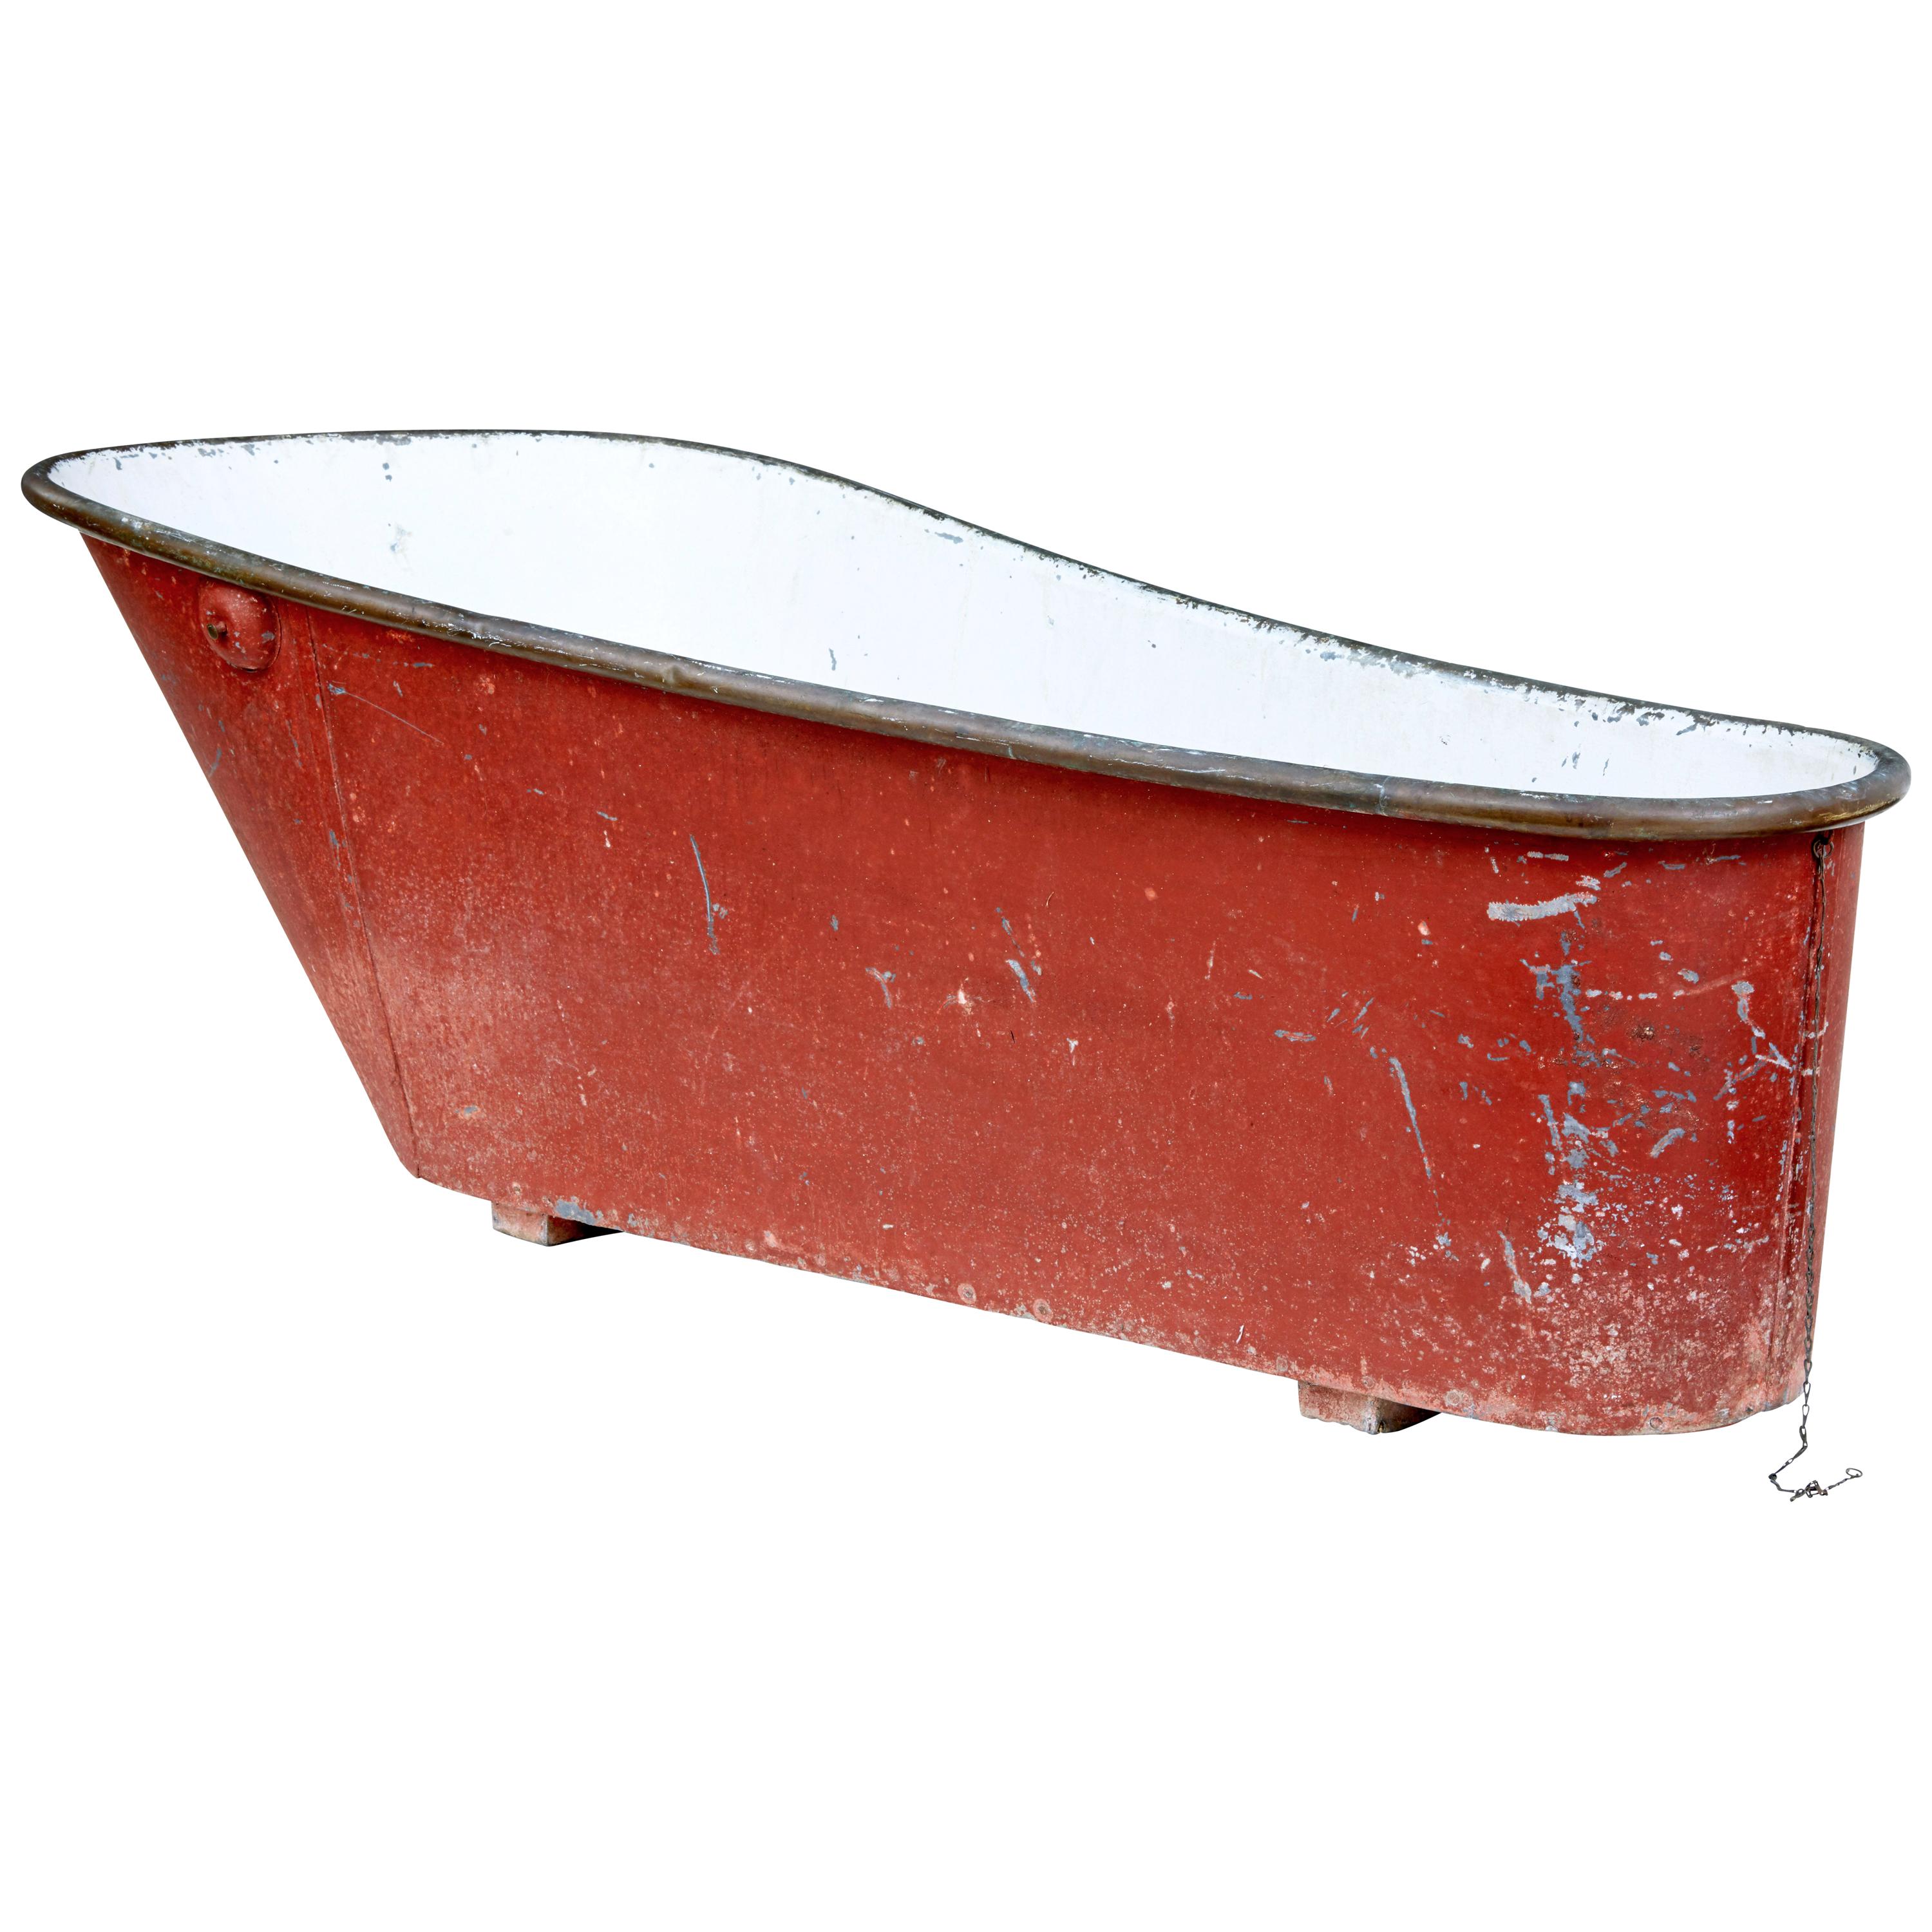 Late 19th Century Painted Red Copper and Tin Bath Tub